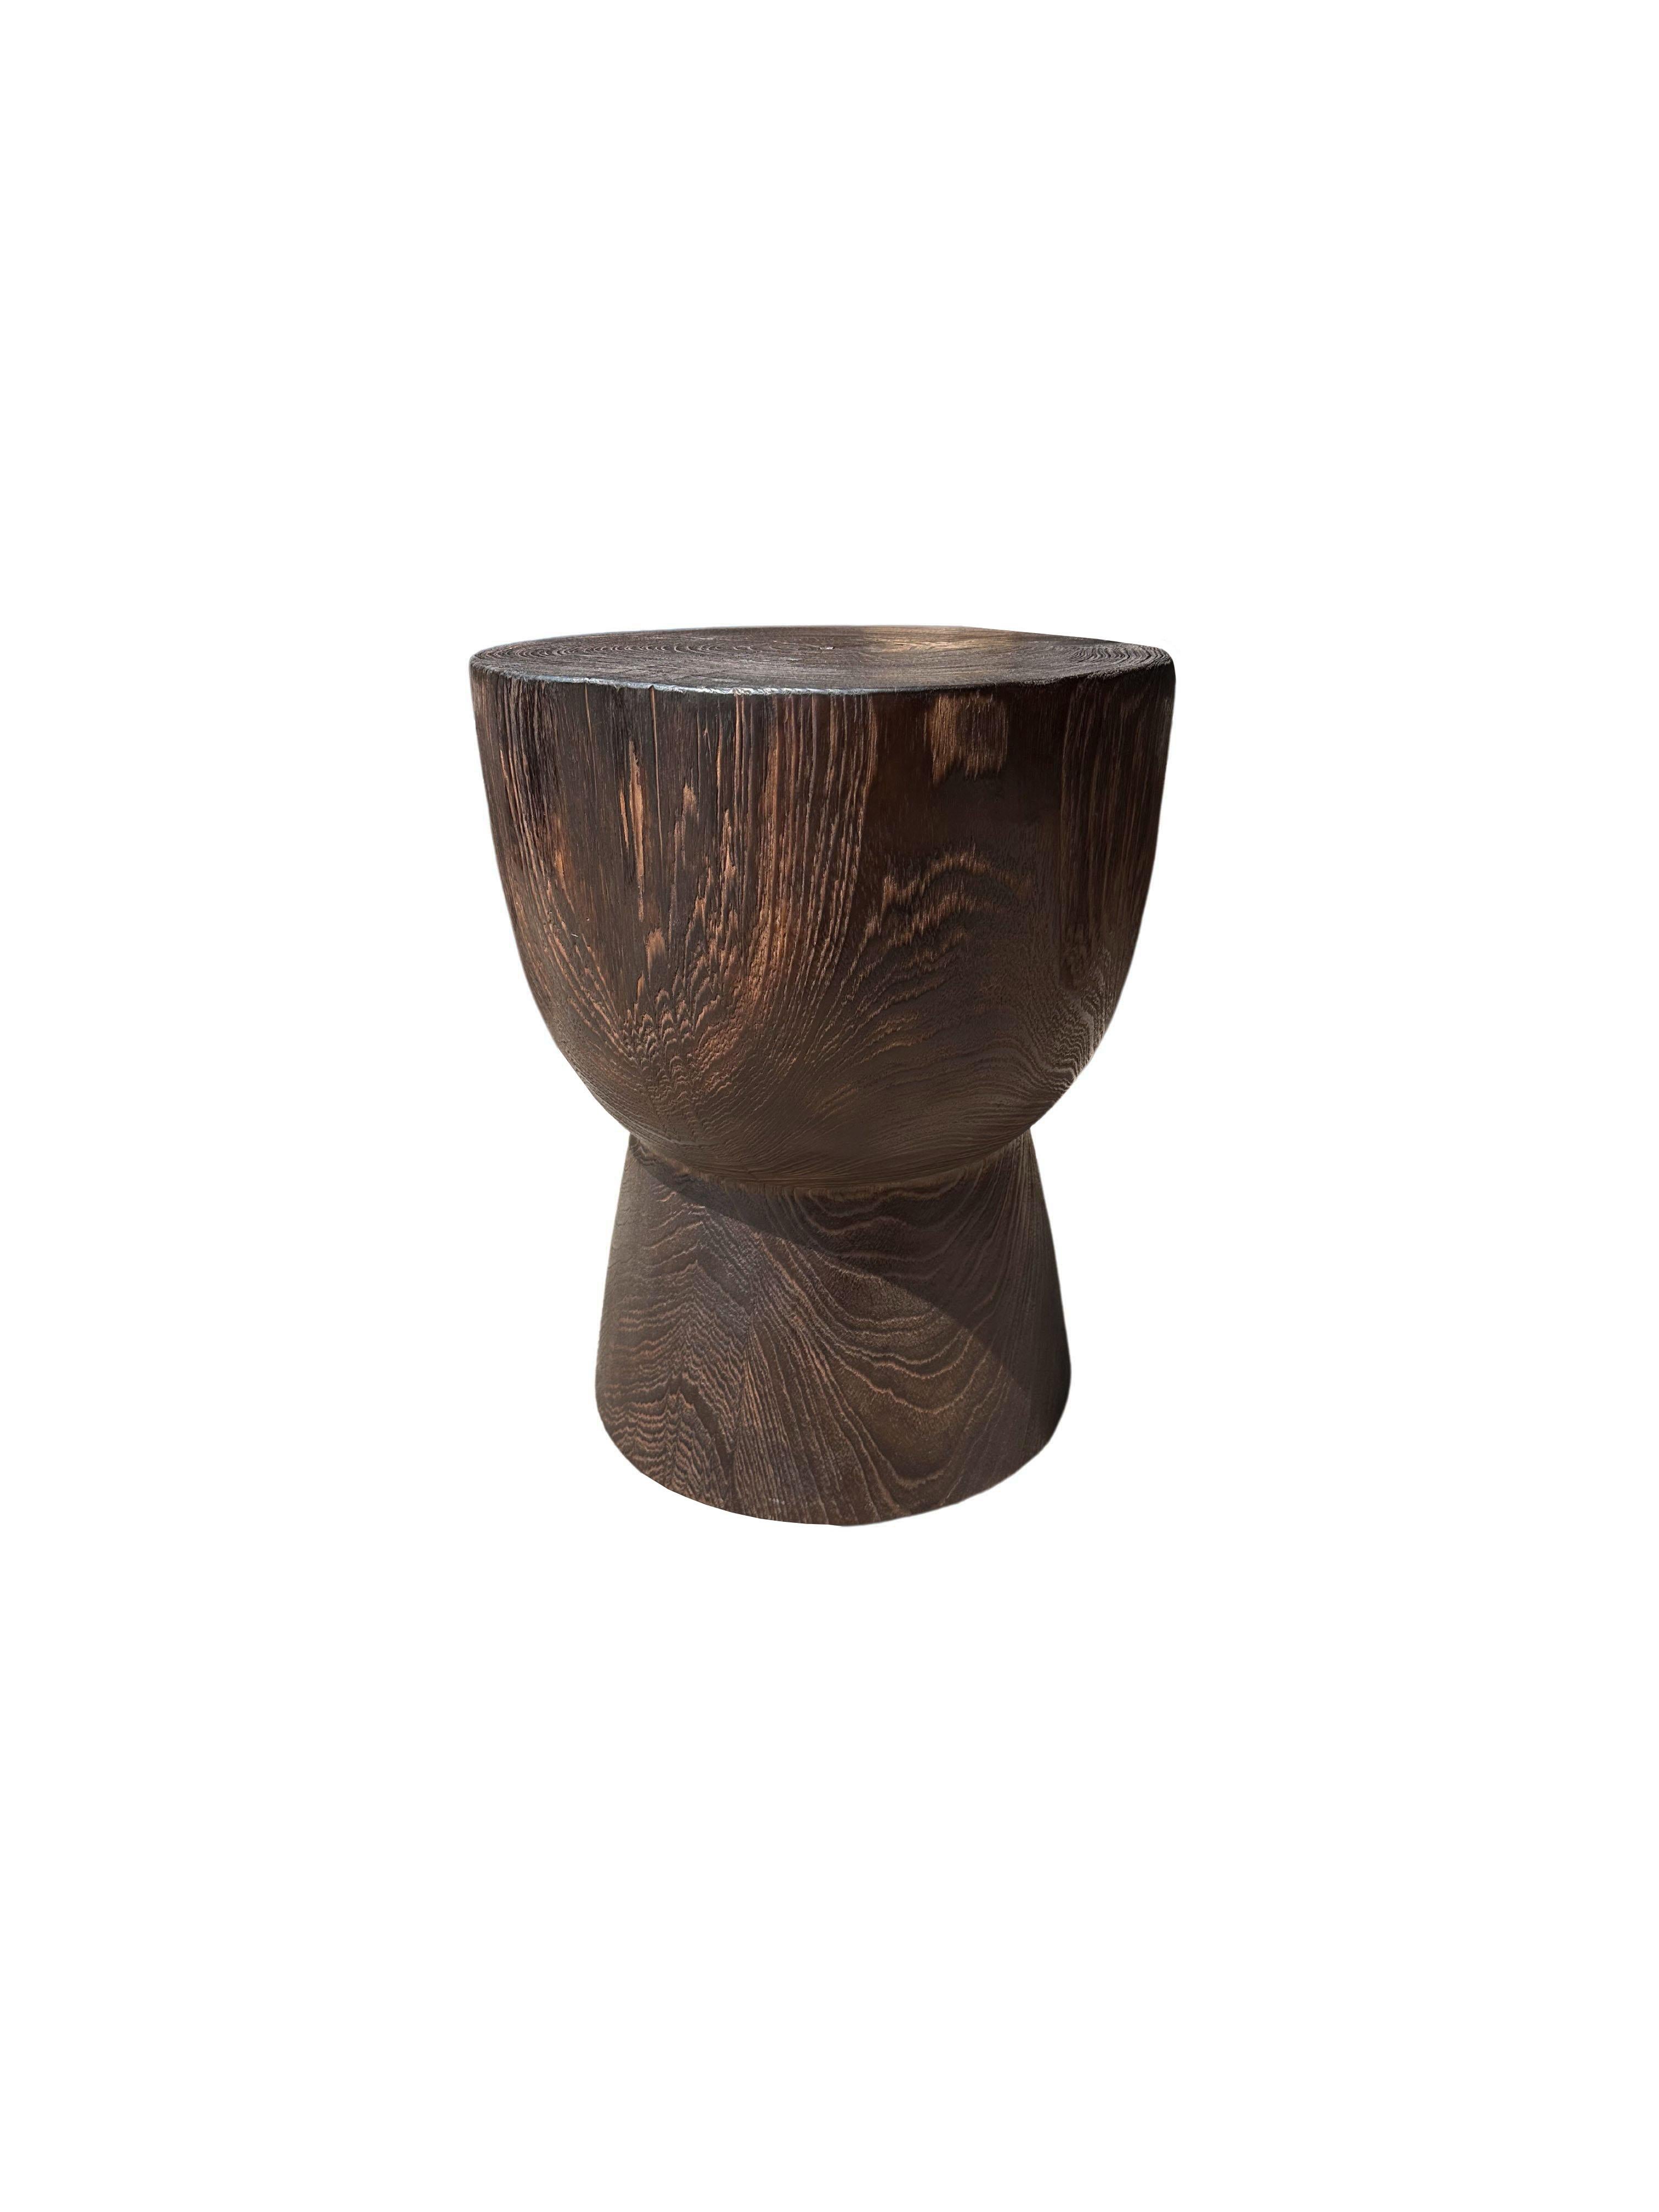 Organic Modern Sculptural Round Table Crafted from Solid Suar Wood, Natural Finish For Sale